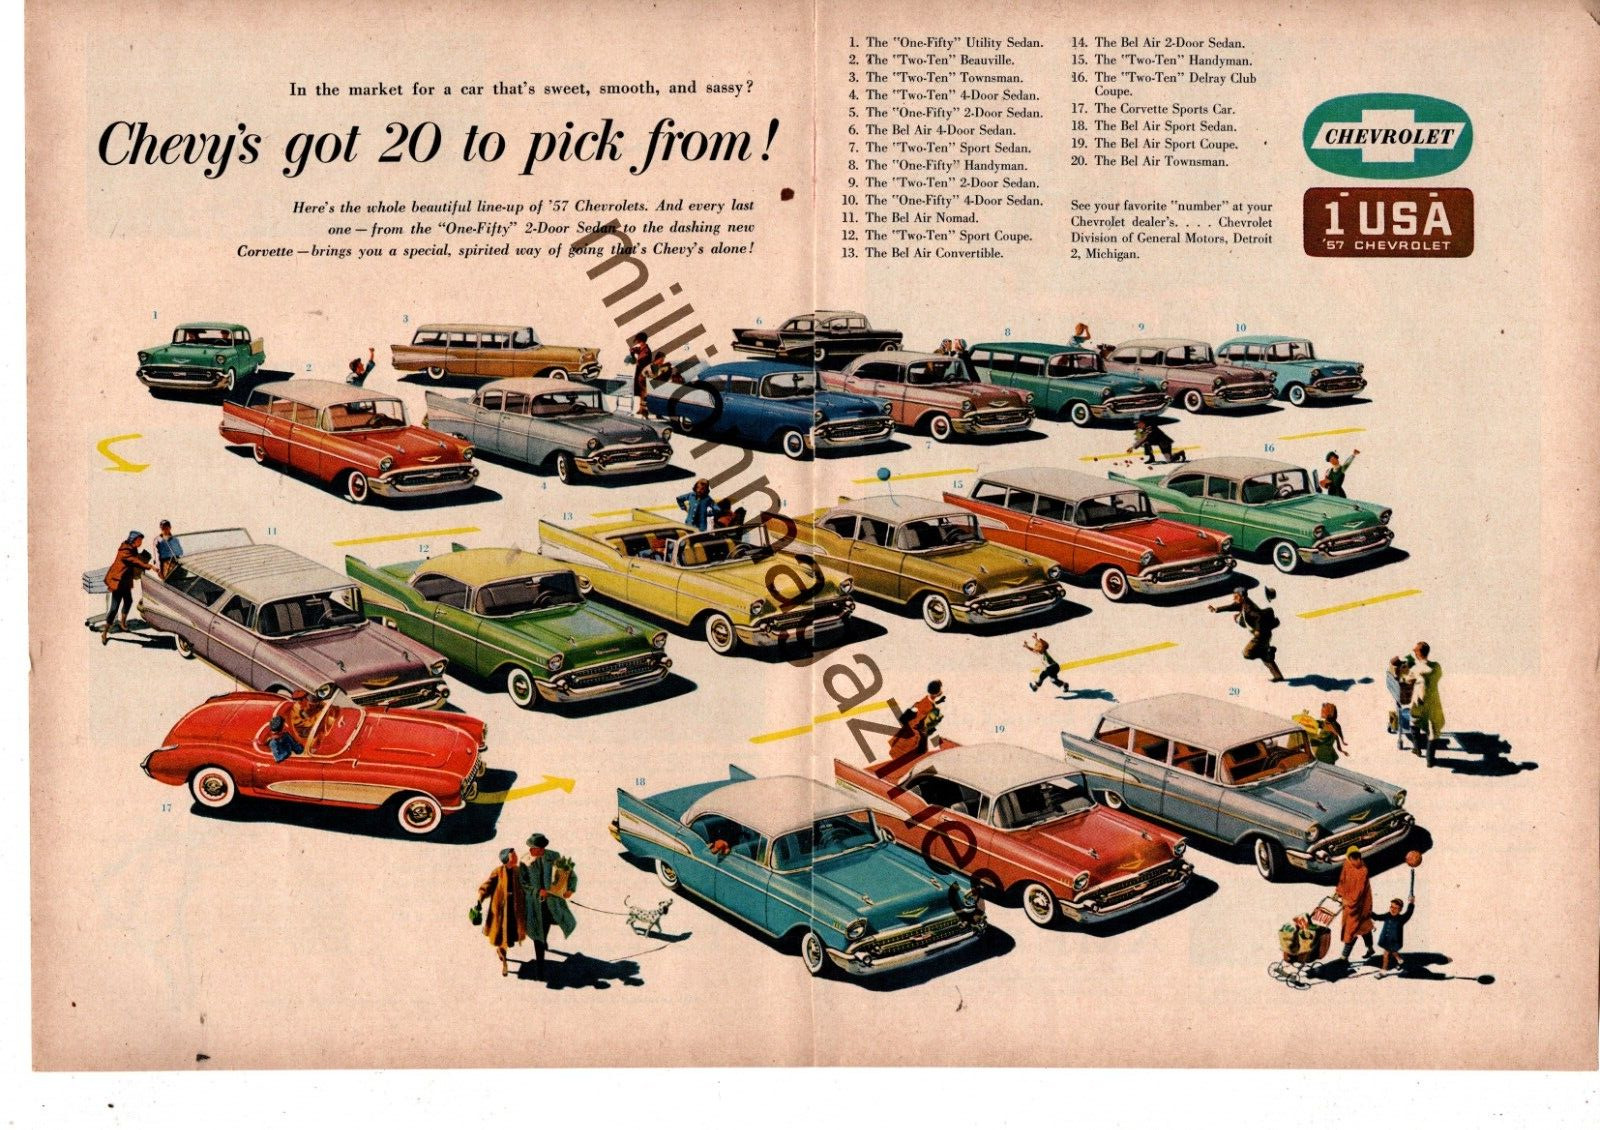 1957 Chevrolet Original 2 page ad showing 20 models including Nomad and Corvette